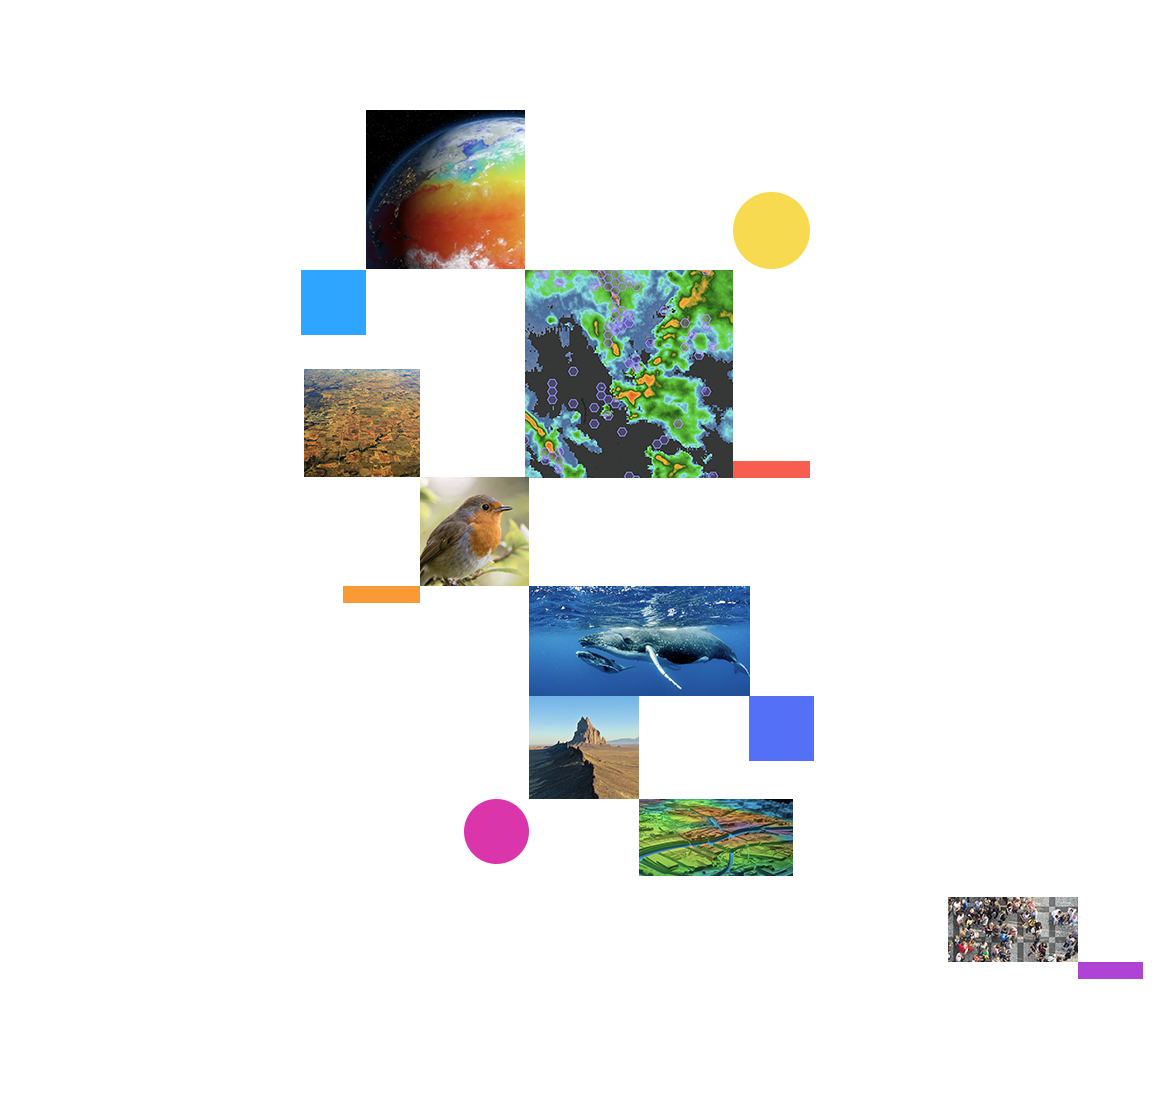 Square images of a whale swimming in clear water, a bird sitting on a branch, desserts, crowded streets, and an space view of Earth with heat signature.